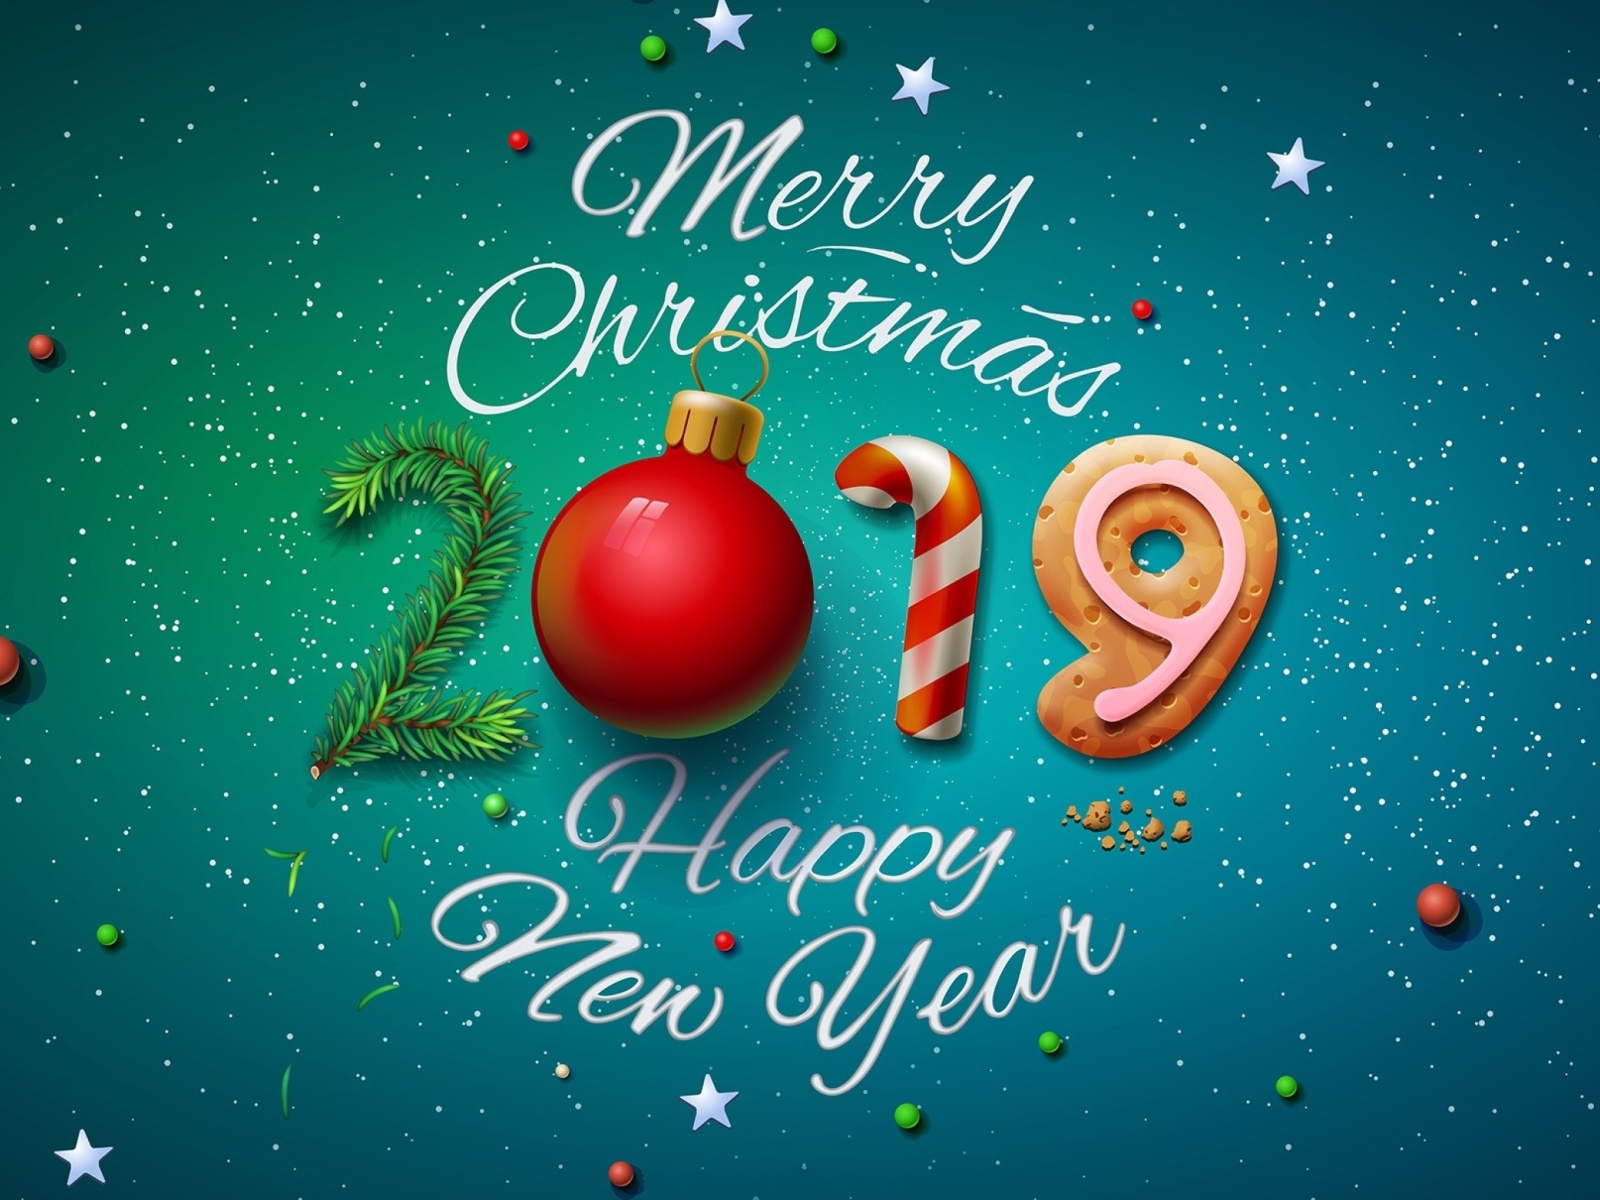 Merry Christmas and Happy New Year 2019 wallpaper 1600x1200